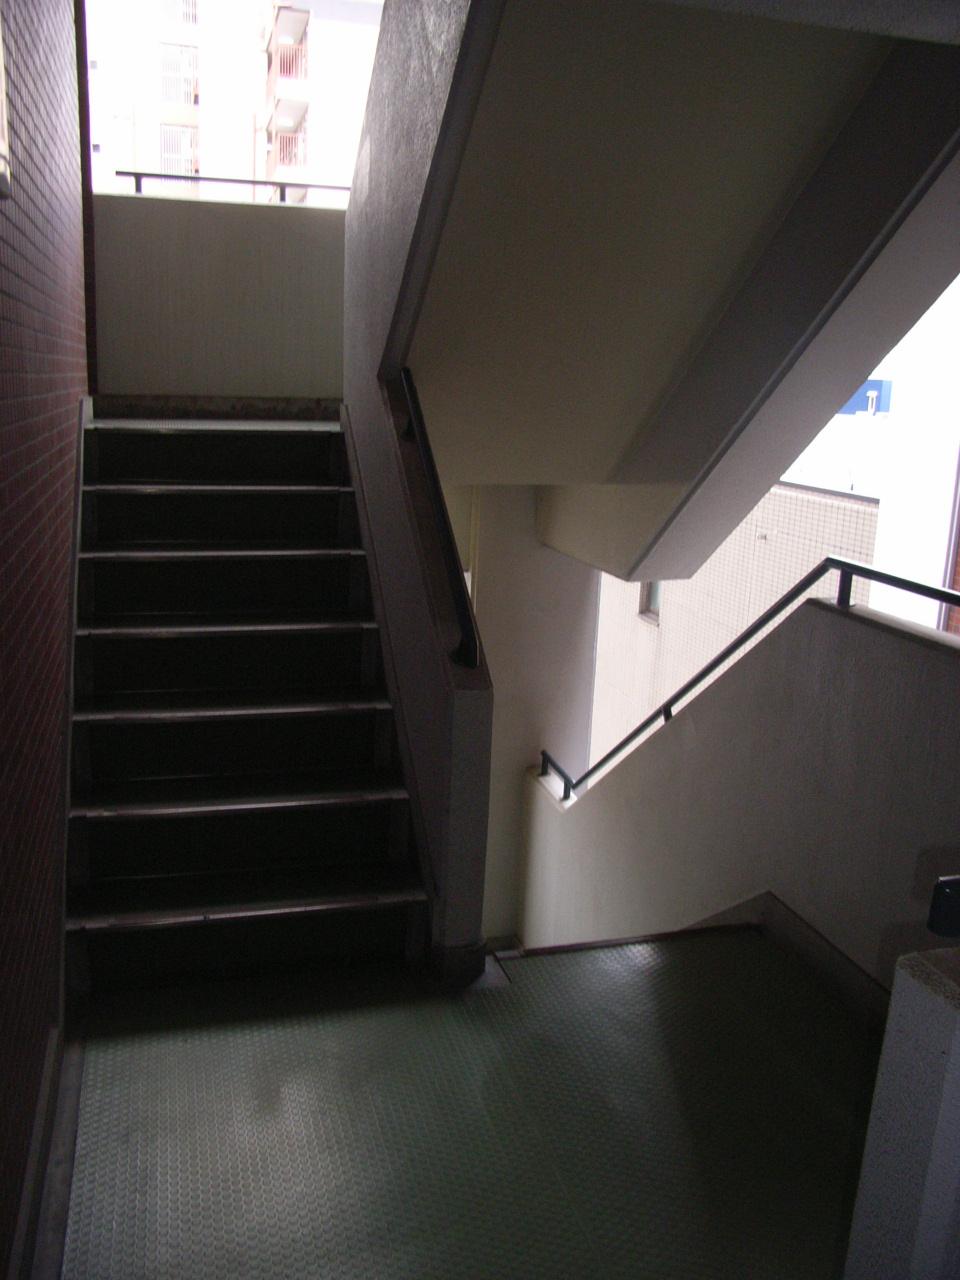 Other common areas. Shared stairs